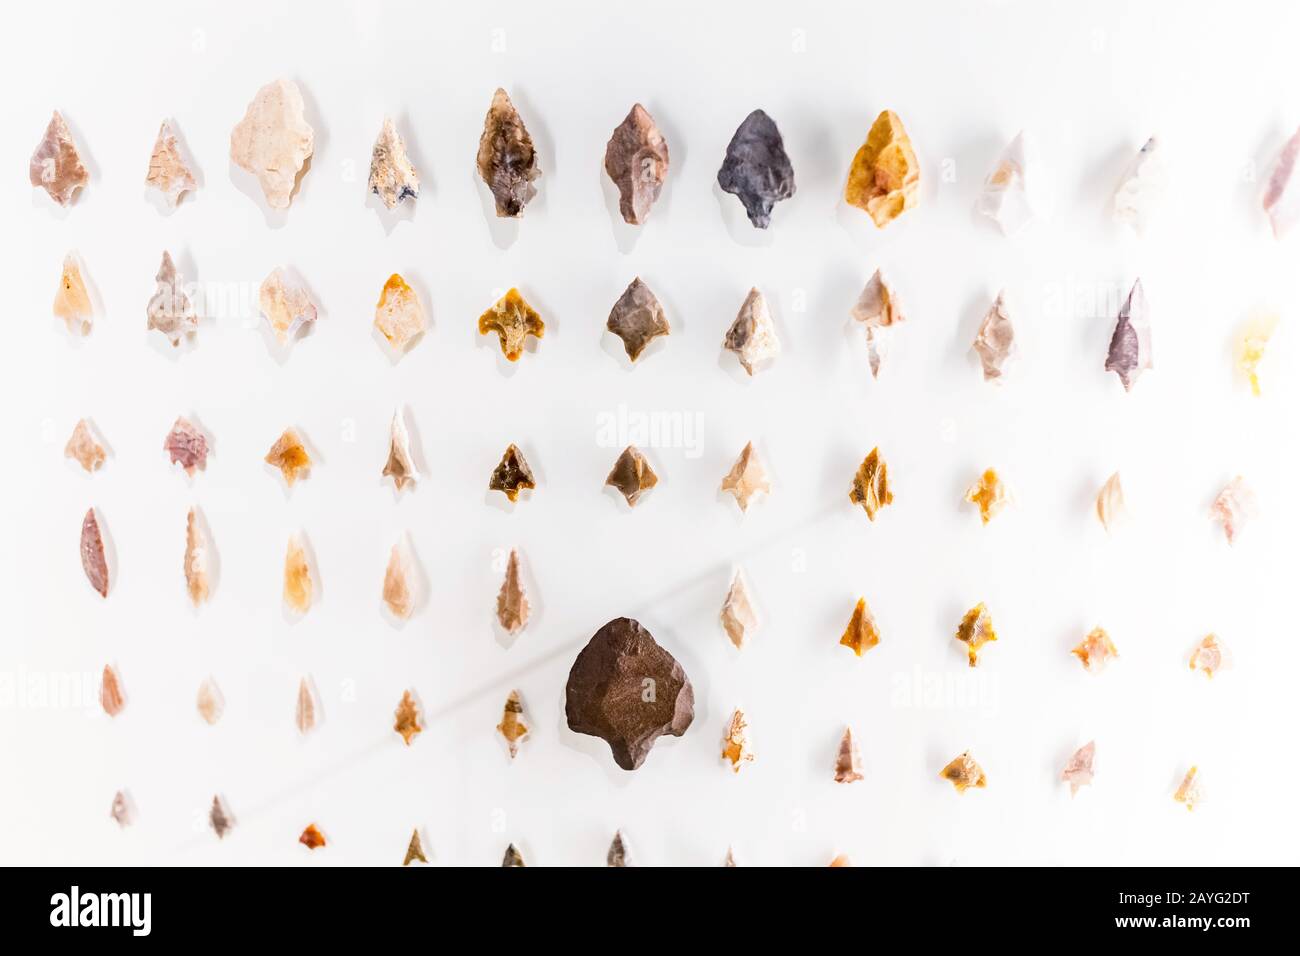 Stone arrowheads as primitive weapon and tools, archeology concept Stock Photo